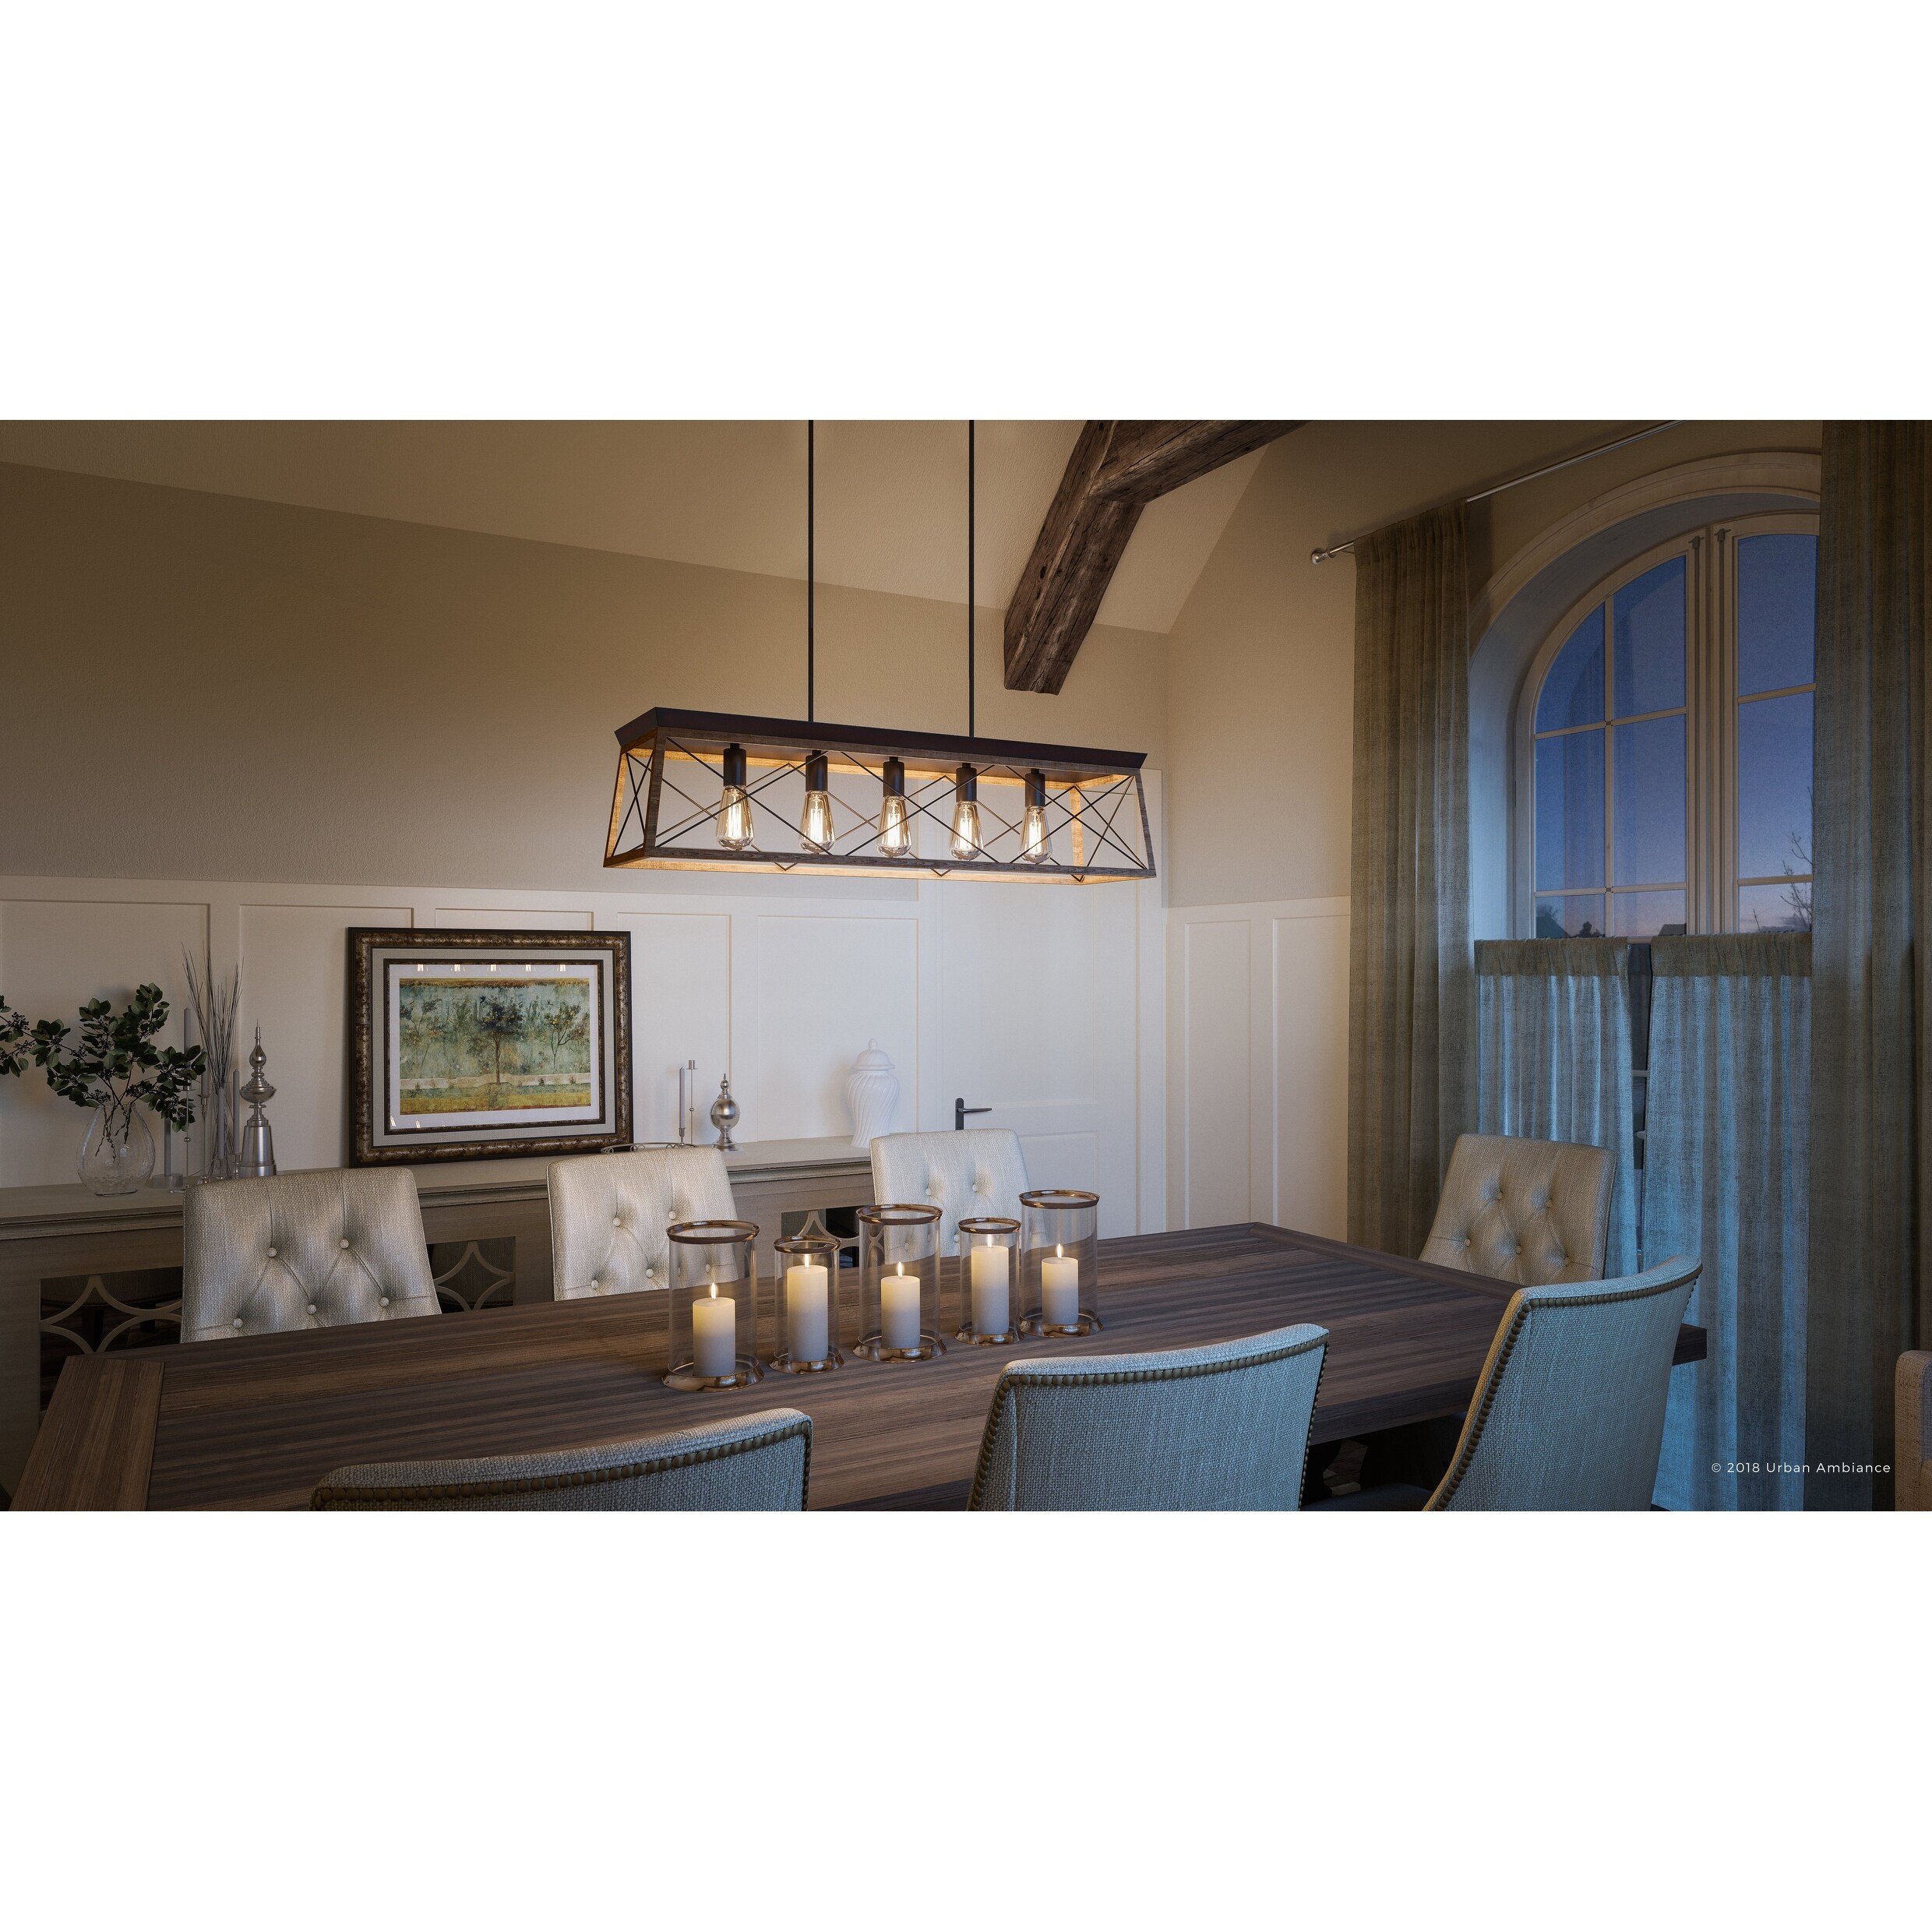 Luxury Industrial Chic Island/Linear Chandelier UHP2126 from The Berkeley Collection by Urban Ambiance Large Size: 9H x 38W Olde Bronze Finish with Modern Farmhouse Style Elements